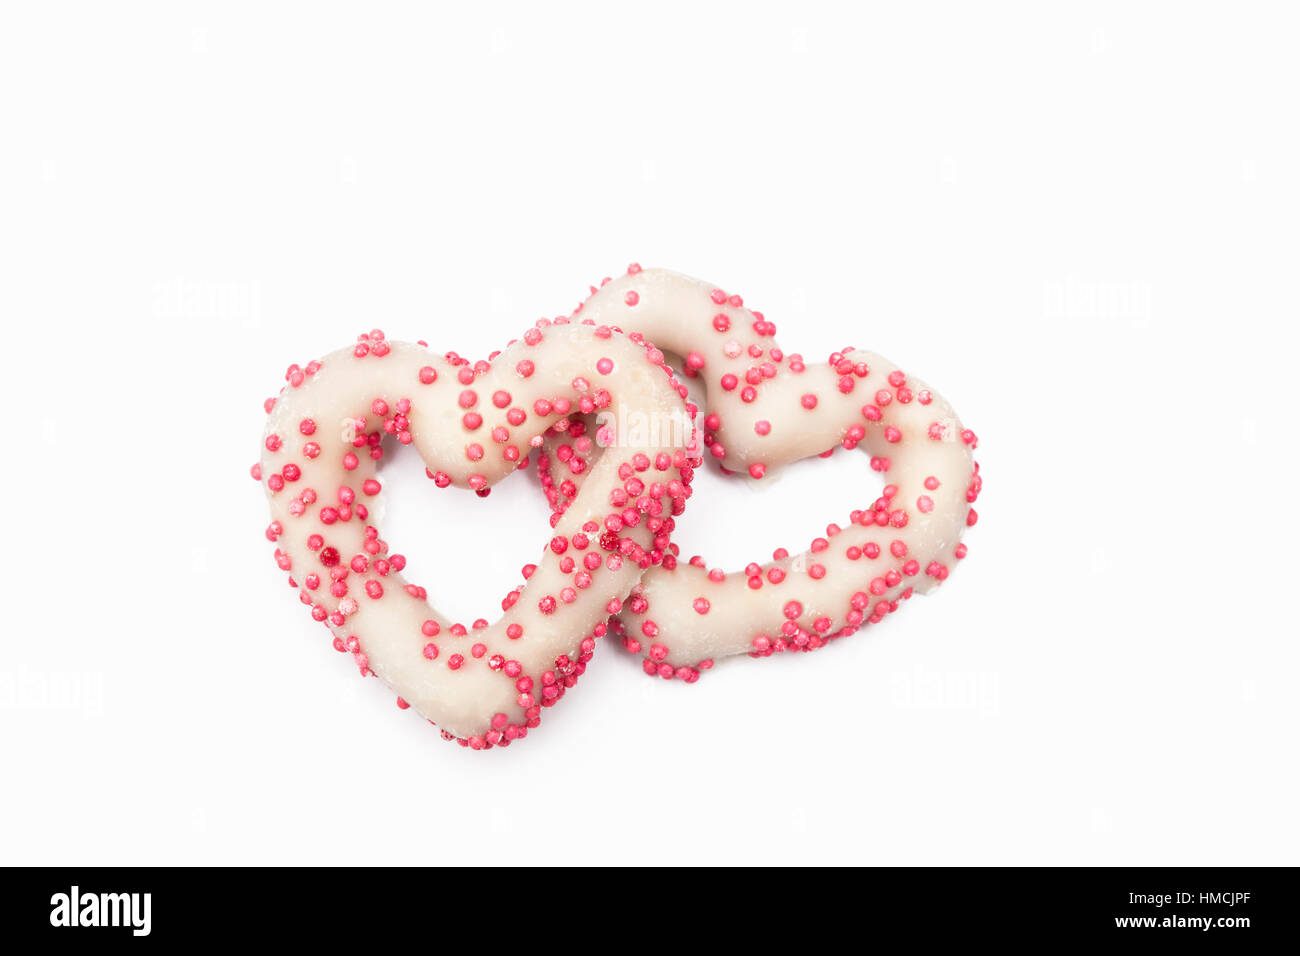 Two white chocolate covered pretzels Stock Photo